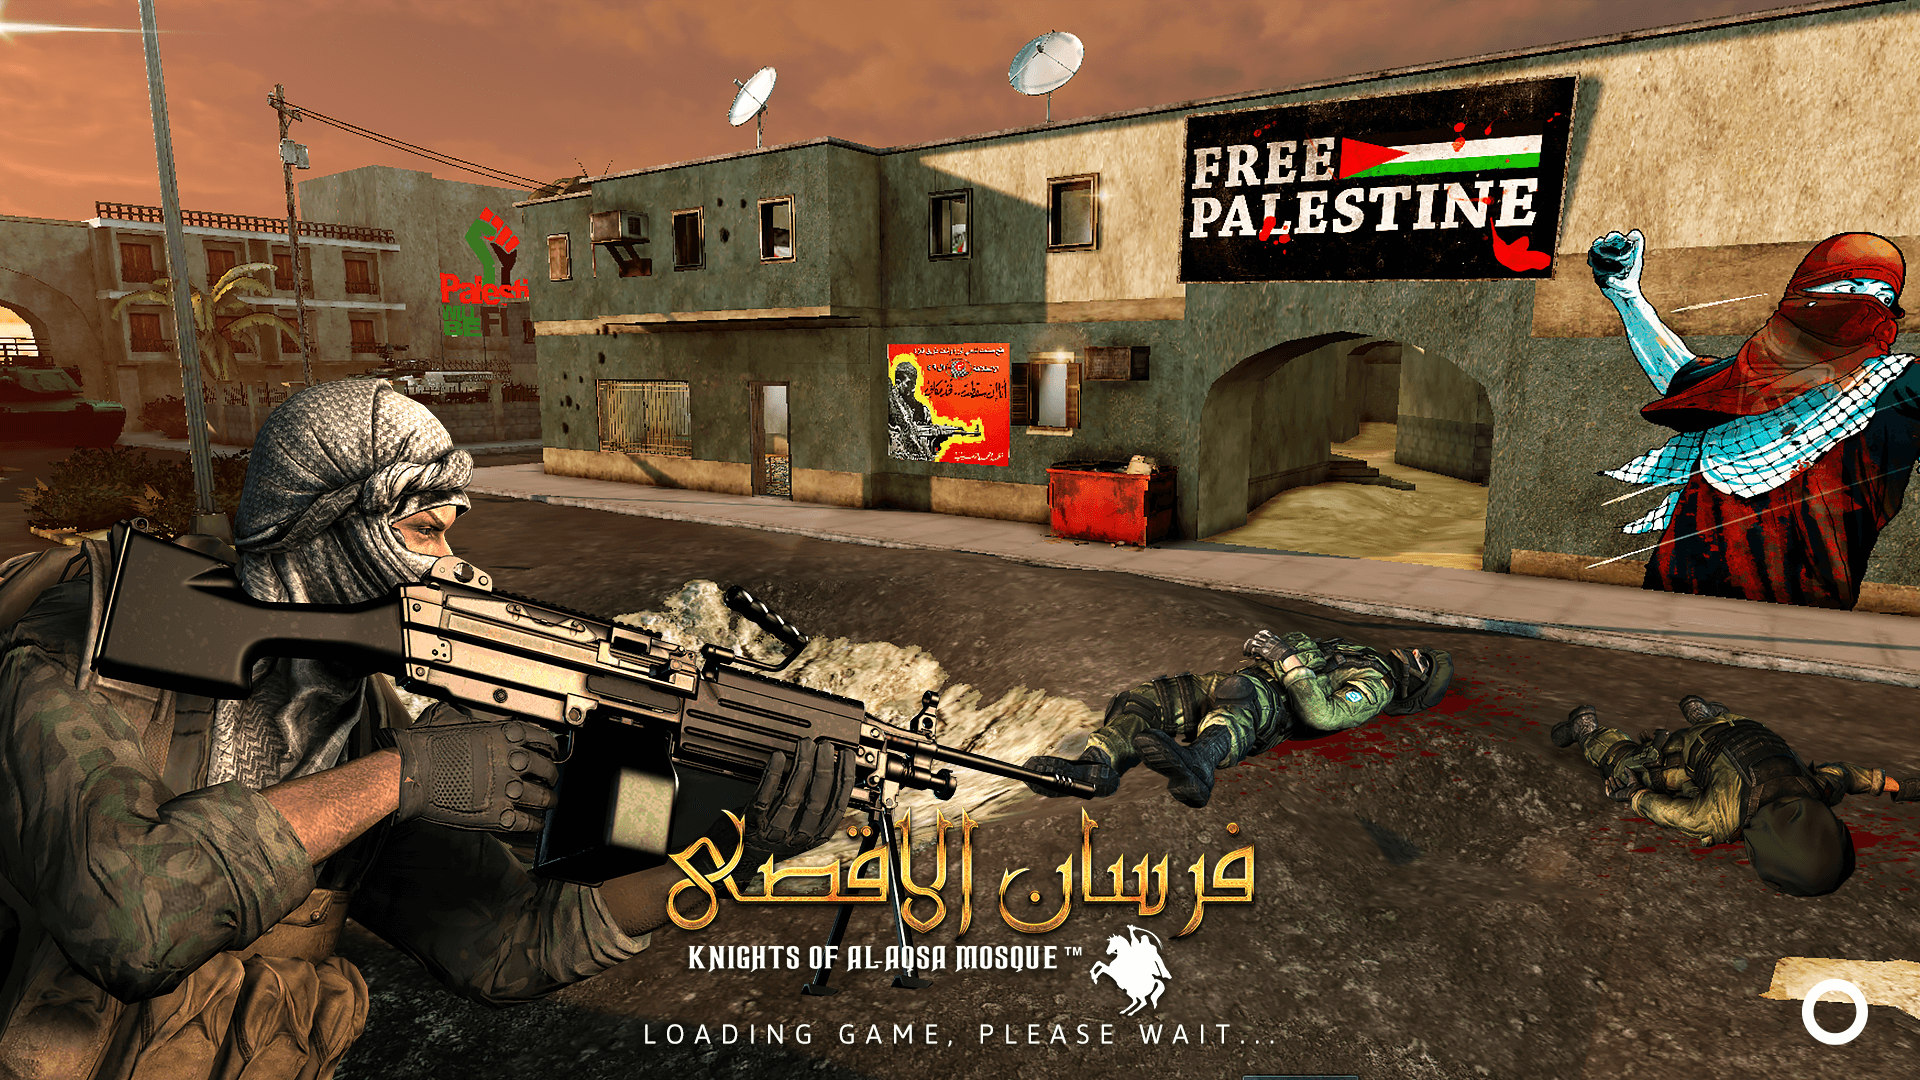 Vote for Fursan al-Aqsa - Indie Game of the Year 2022 image - ModDB